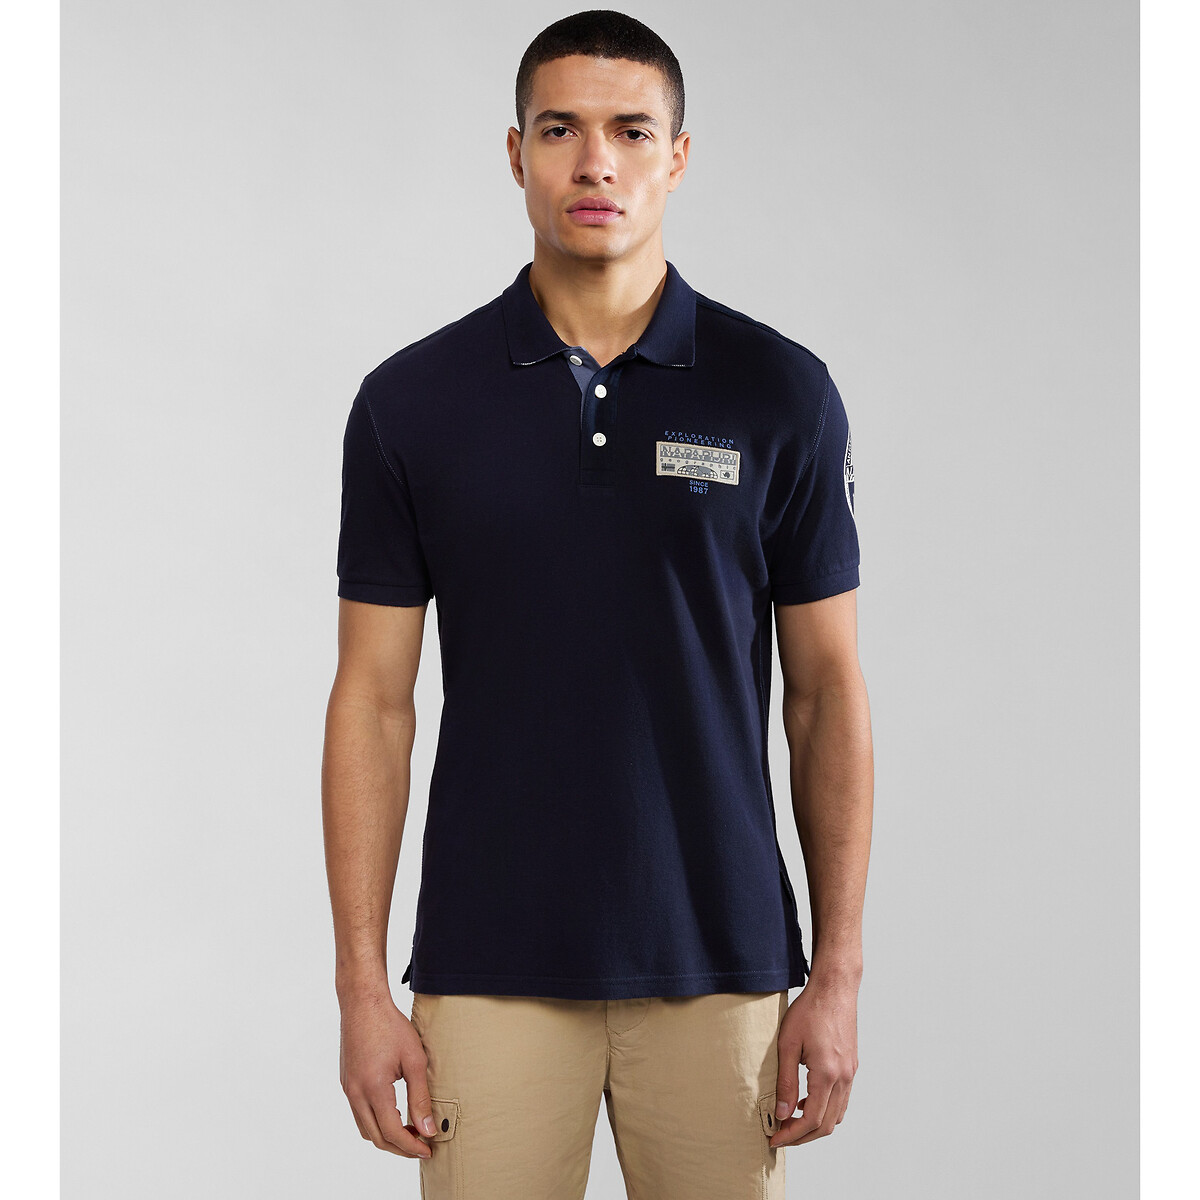 Image of Amundsen Cotton Polo Shirt with Short Sleeves